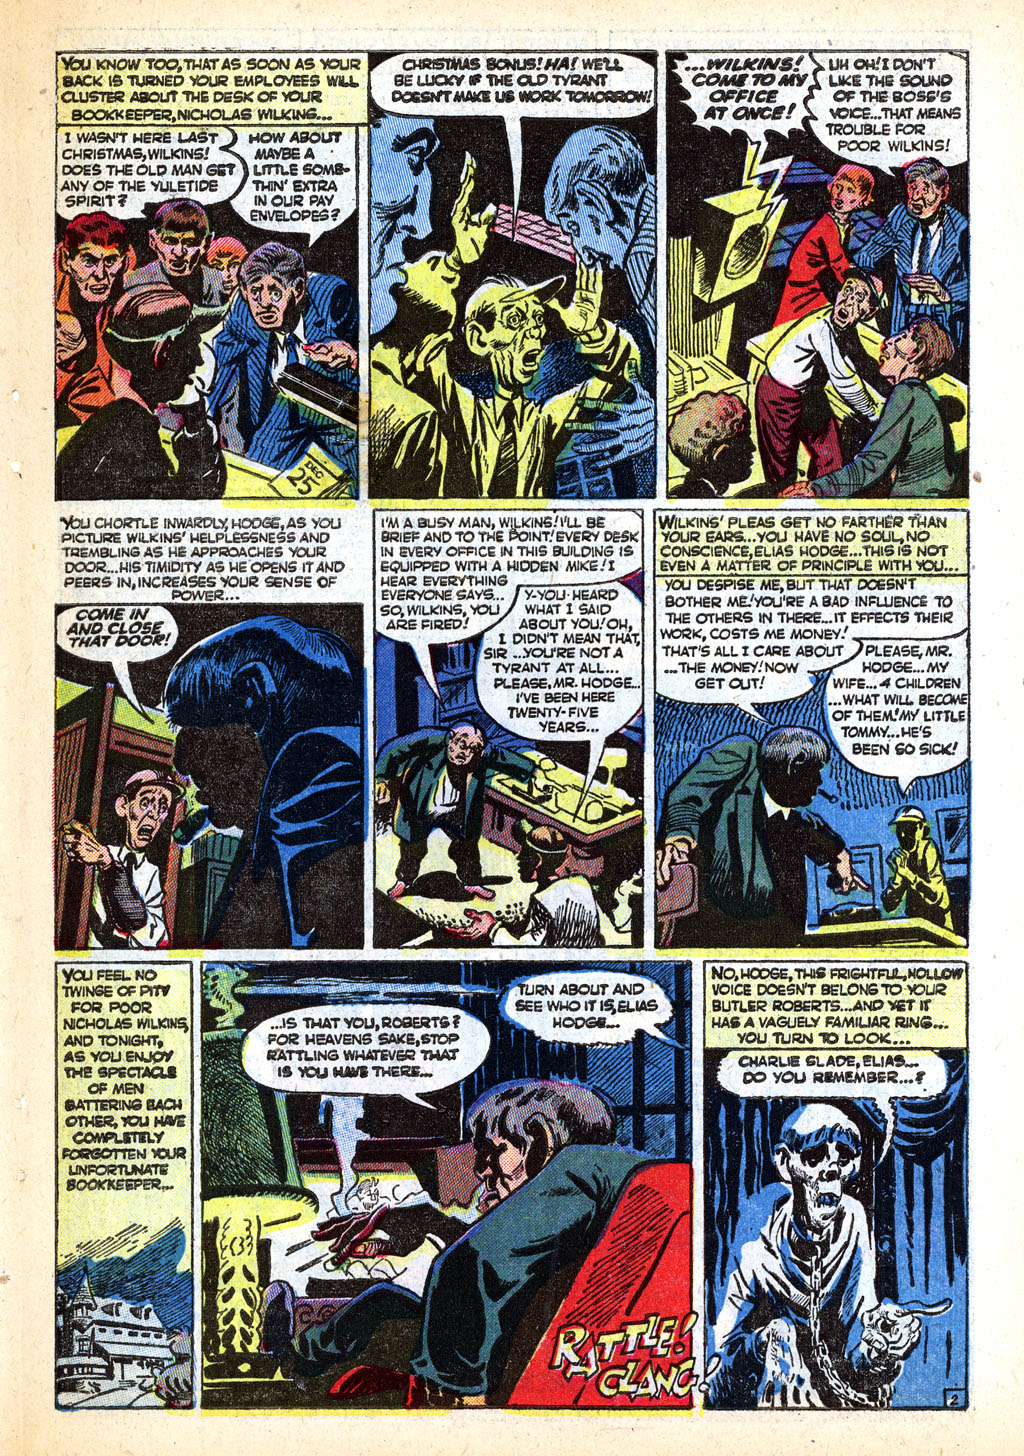 Marvel Tales (1949) 112 Page 26